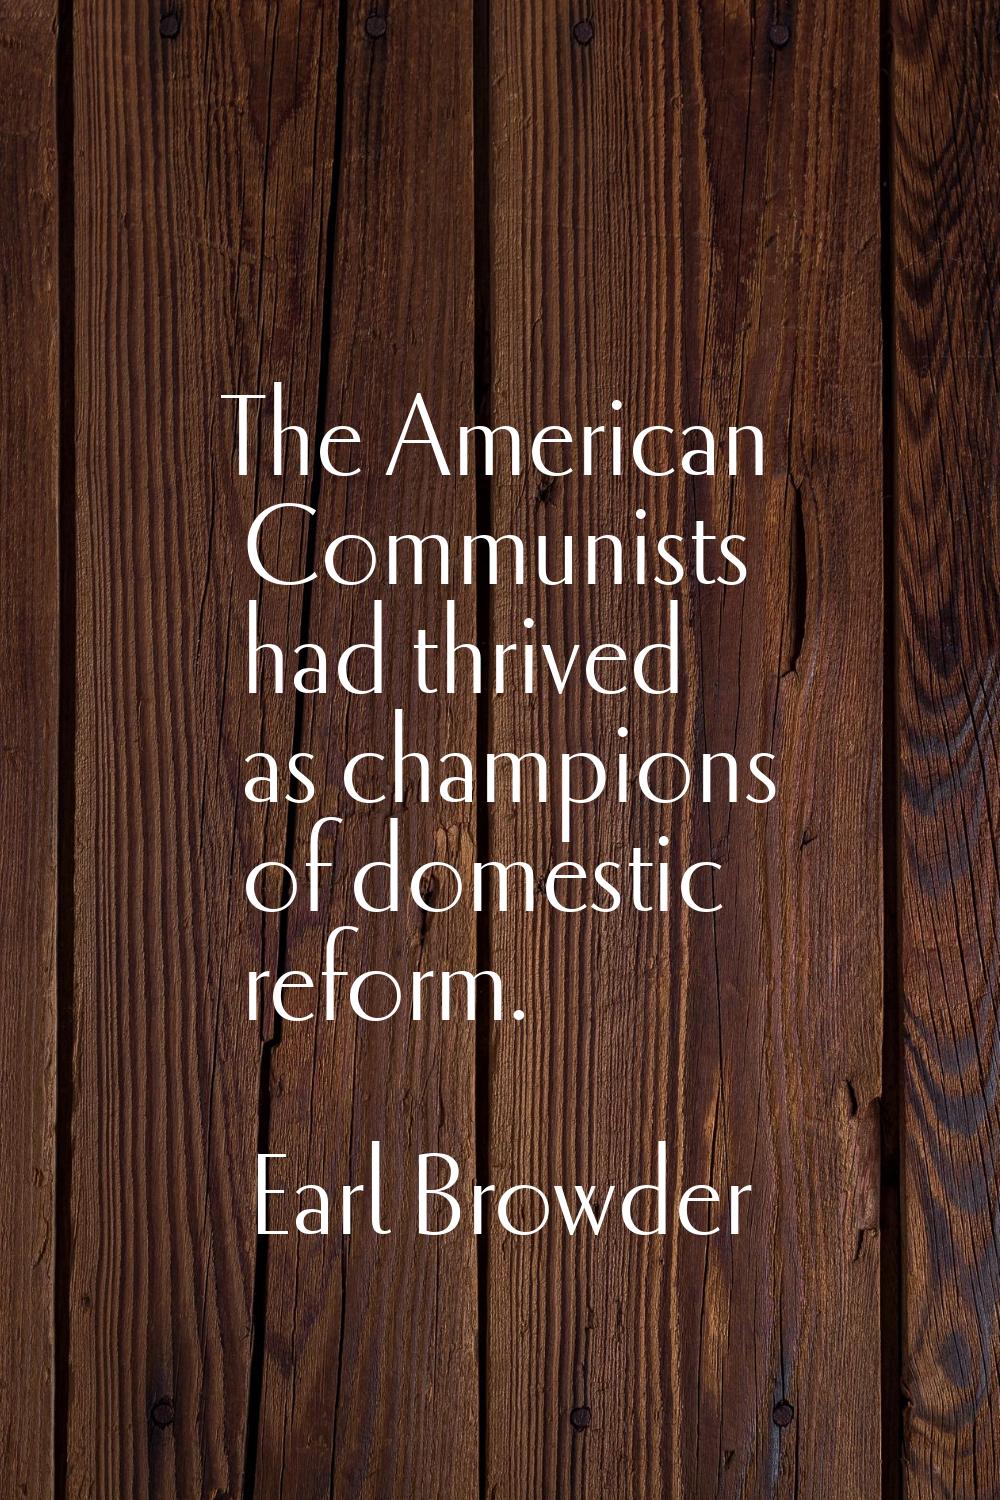 The American Communists had thrived as champions of domestic reform.